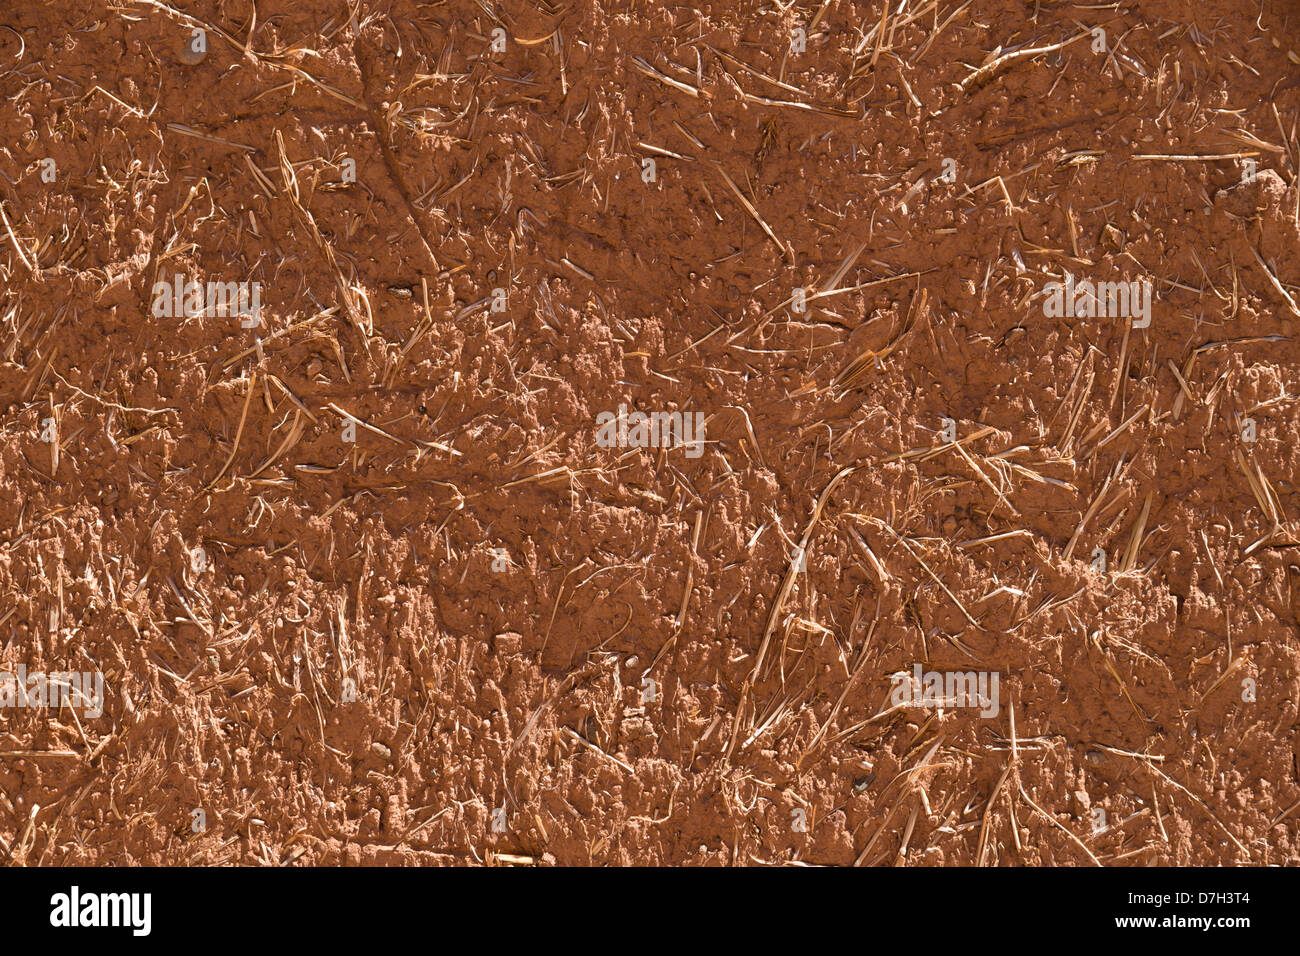 Atlas mountains, Morocco - mud-straw clay based building construction. Close up of wall. Stock Photo